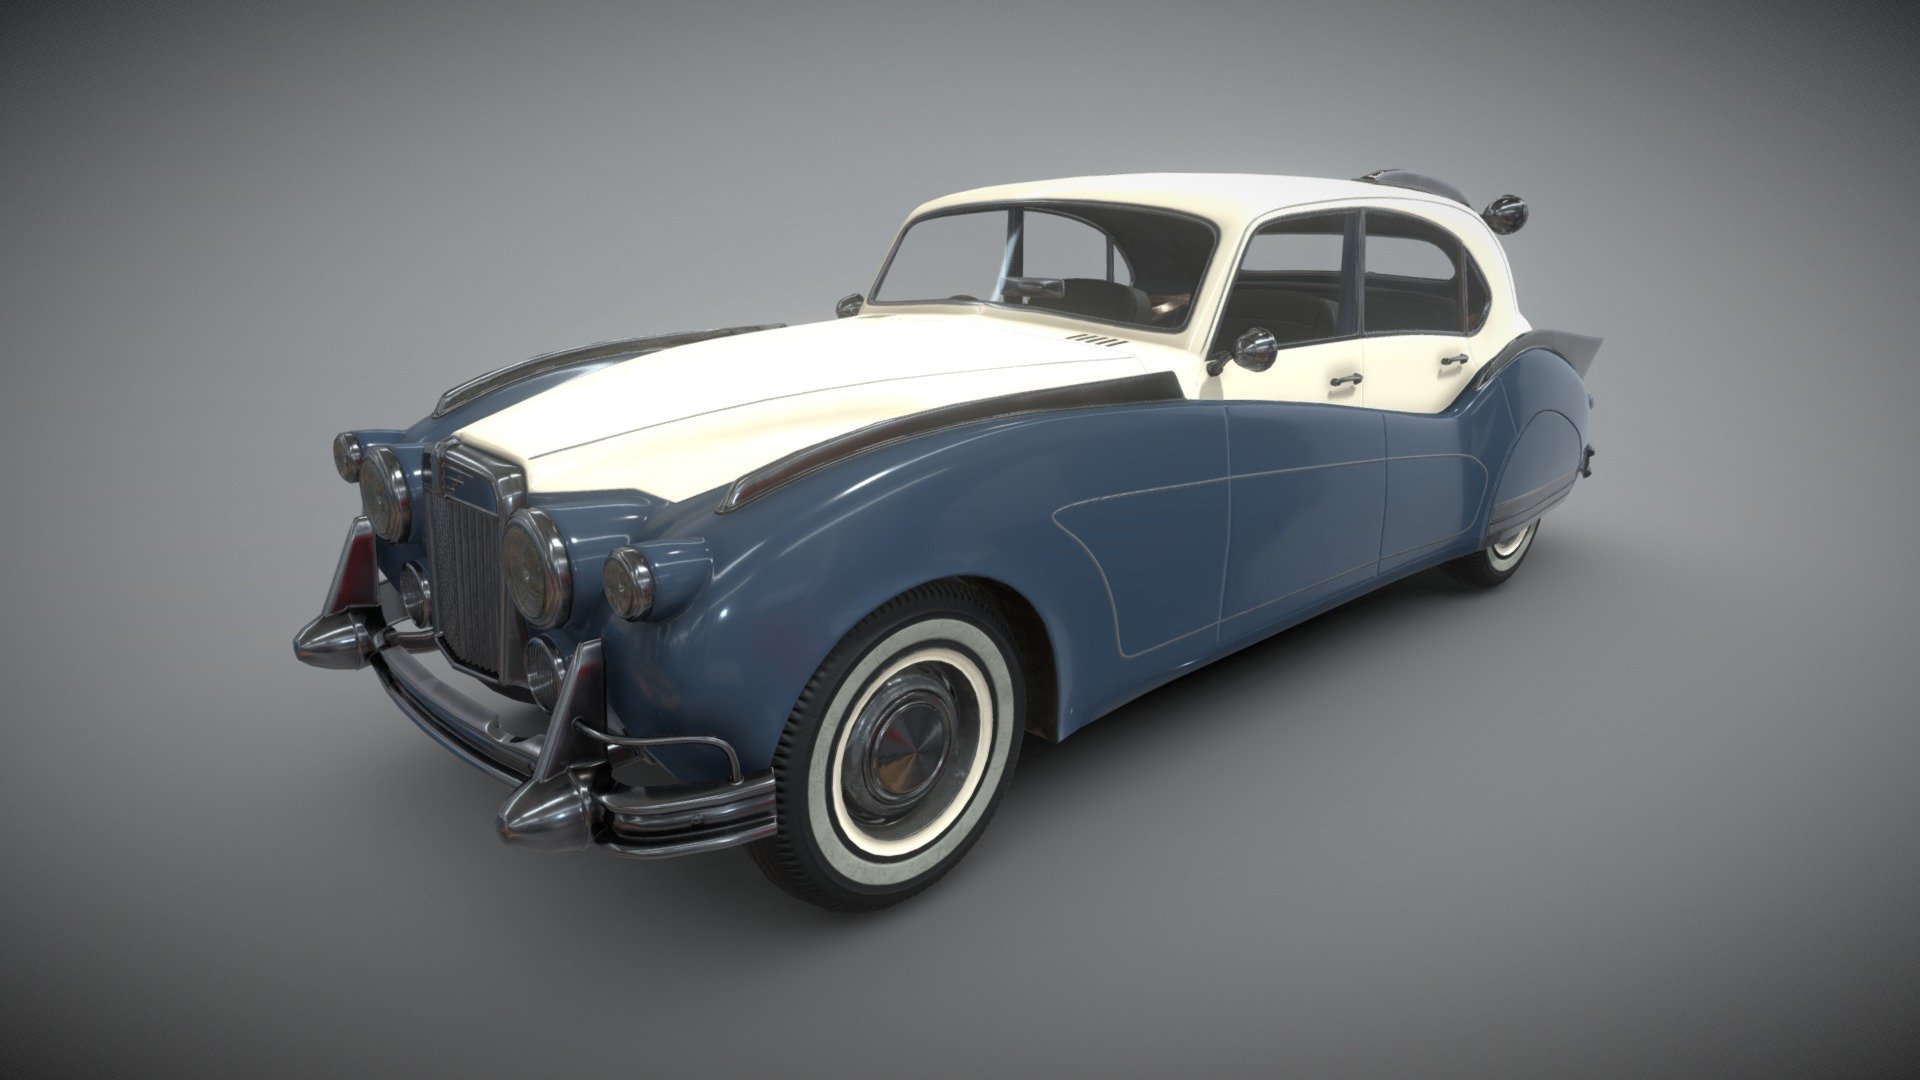 Introducing the Ambassador - a fusion of Atom-Punk inspiration and iconic design! With a perfect blend of design characteristics from iconic prestige cars of the 60’s, this masterpiece exudes class and style.

Crafted using a high-low poly construction method, this model showcases meticulous attention to detail. Enhancing the realism further, it comes with a PBR Metallic / Roughness texture set, where light and shadow interact with precision.

Originally designed for modding purposes, the Ambassador serves as a versatile canvas for creative minds to explore and customize. Fully modeled and operational doors add an authentic touch to your virtual experience.

Discover more of my artwork on ArtStation : https://www.artstation.com/edgeuk90

For a personalized touch, custom color combinations can be accommodated upon request 3d model